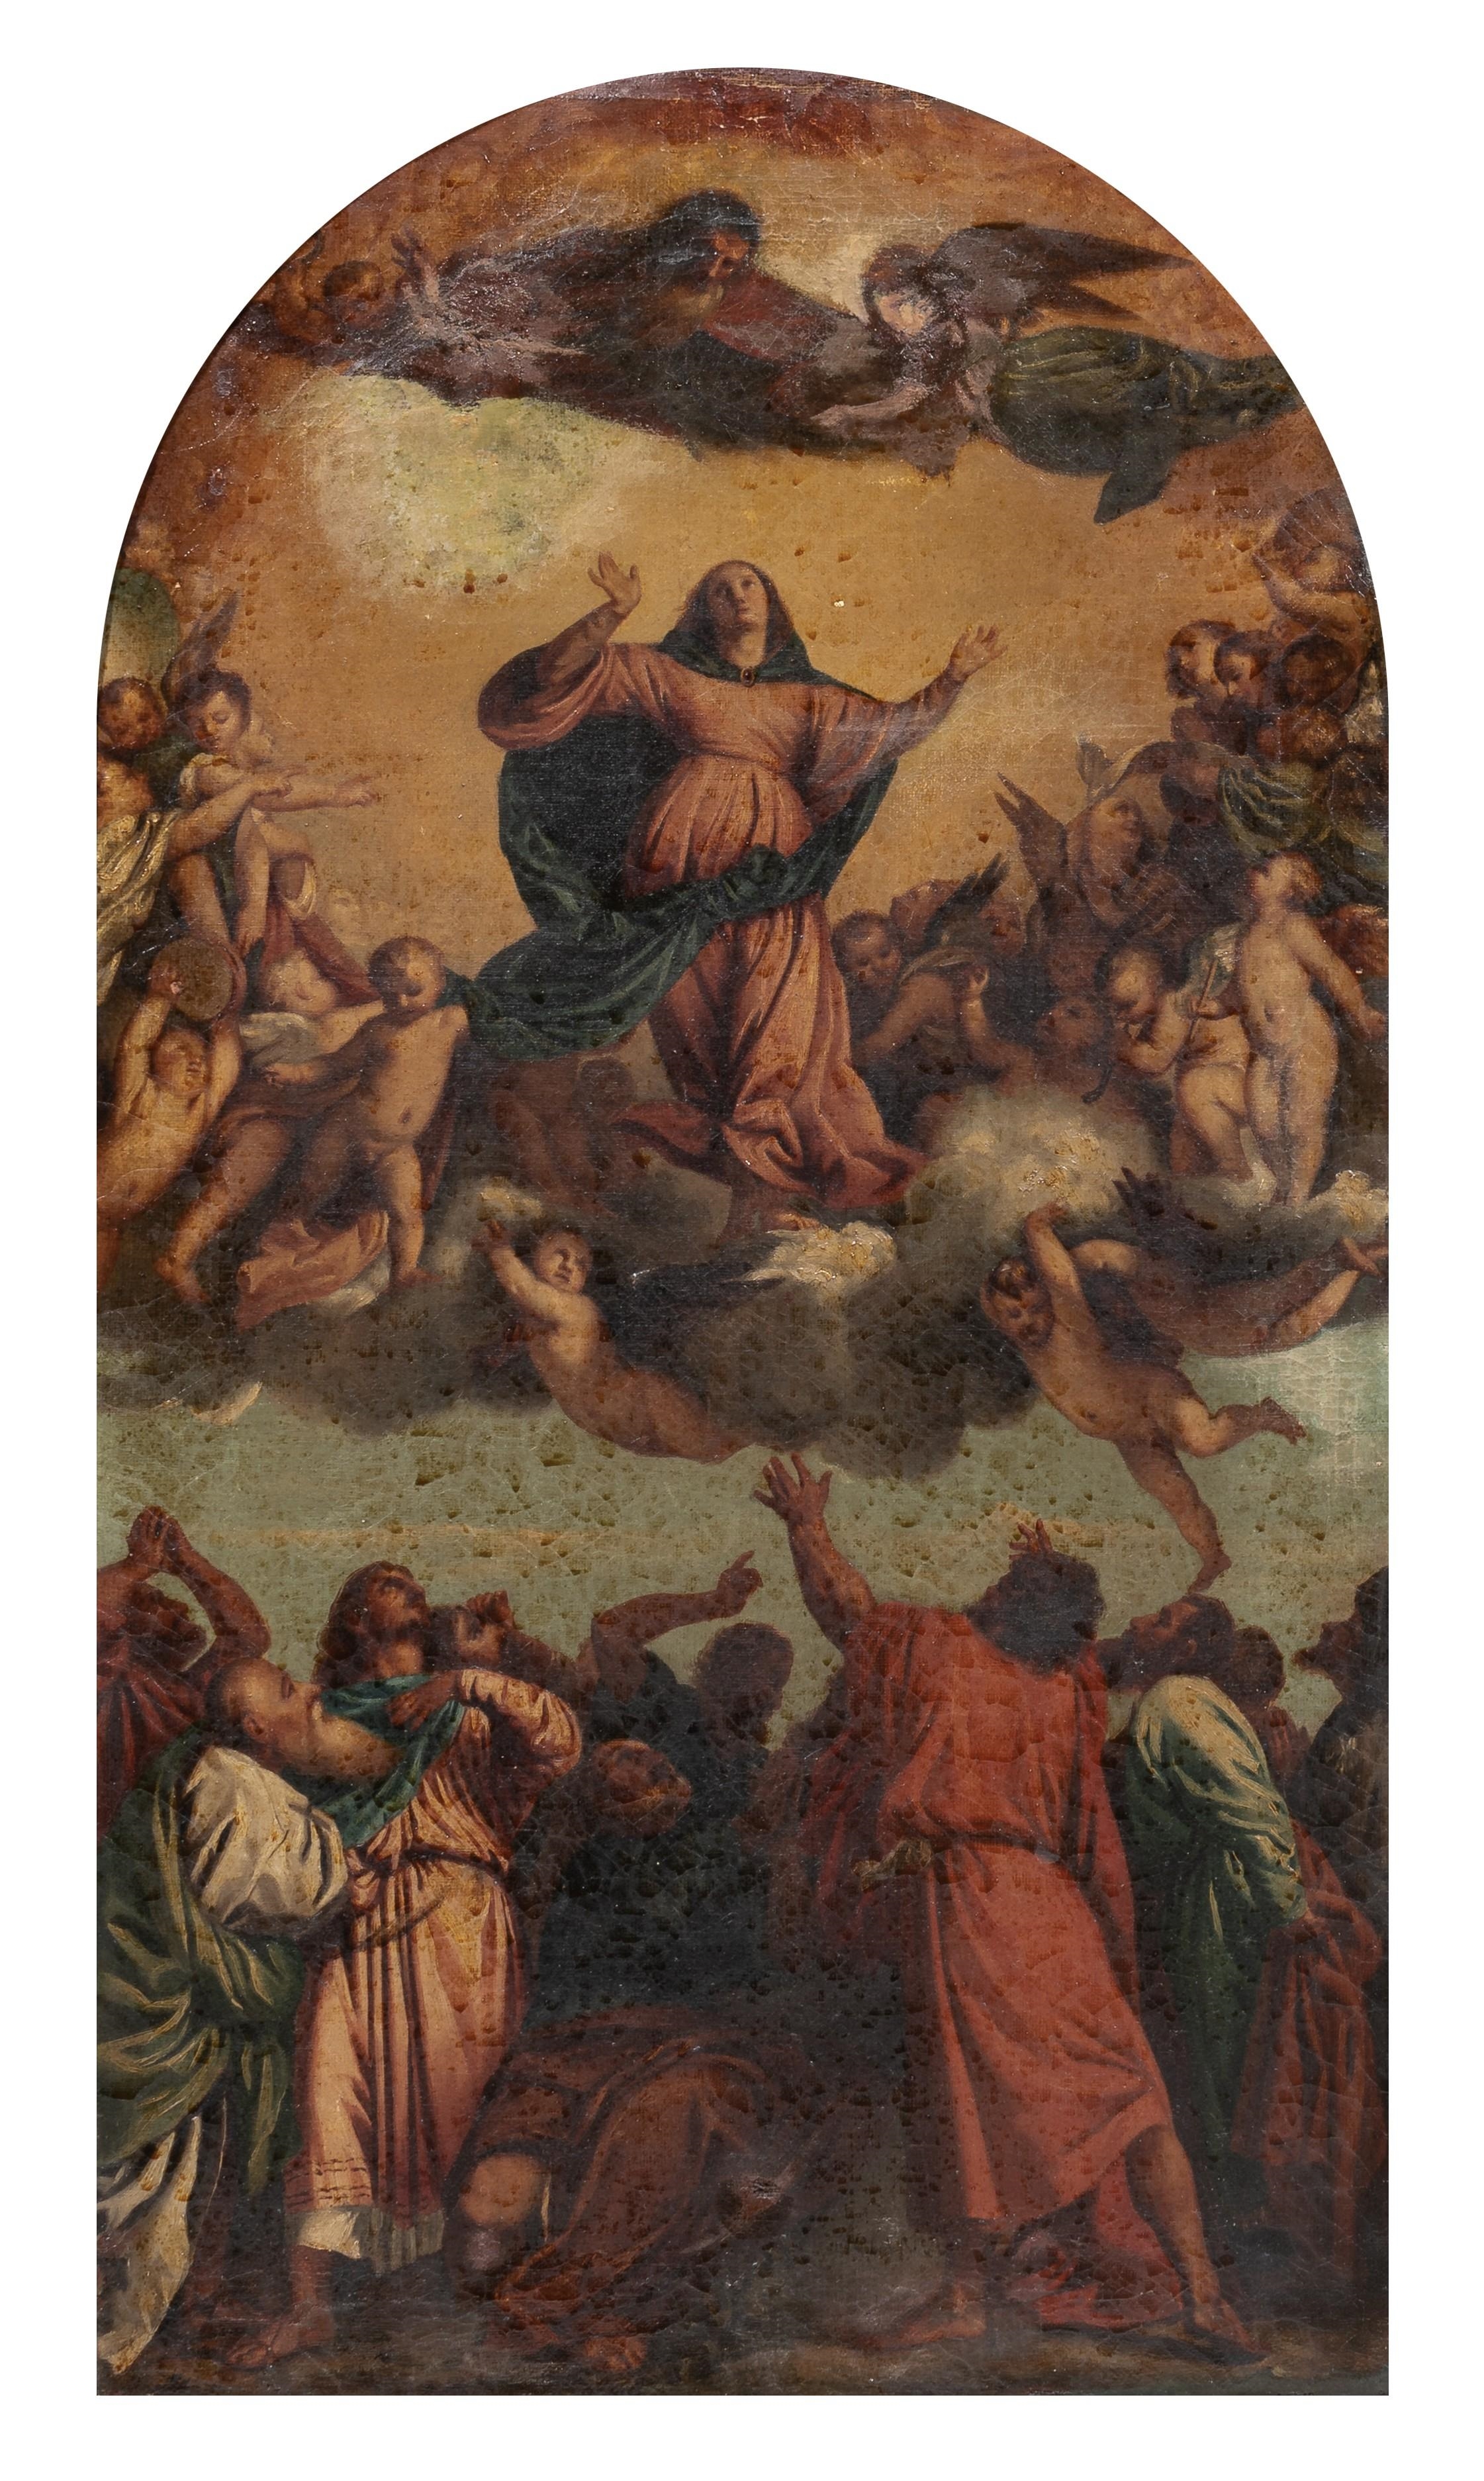 After The Assumption Of The Virgin by Titian